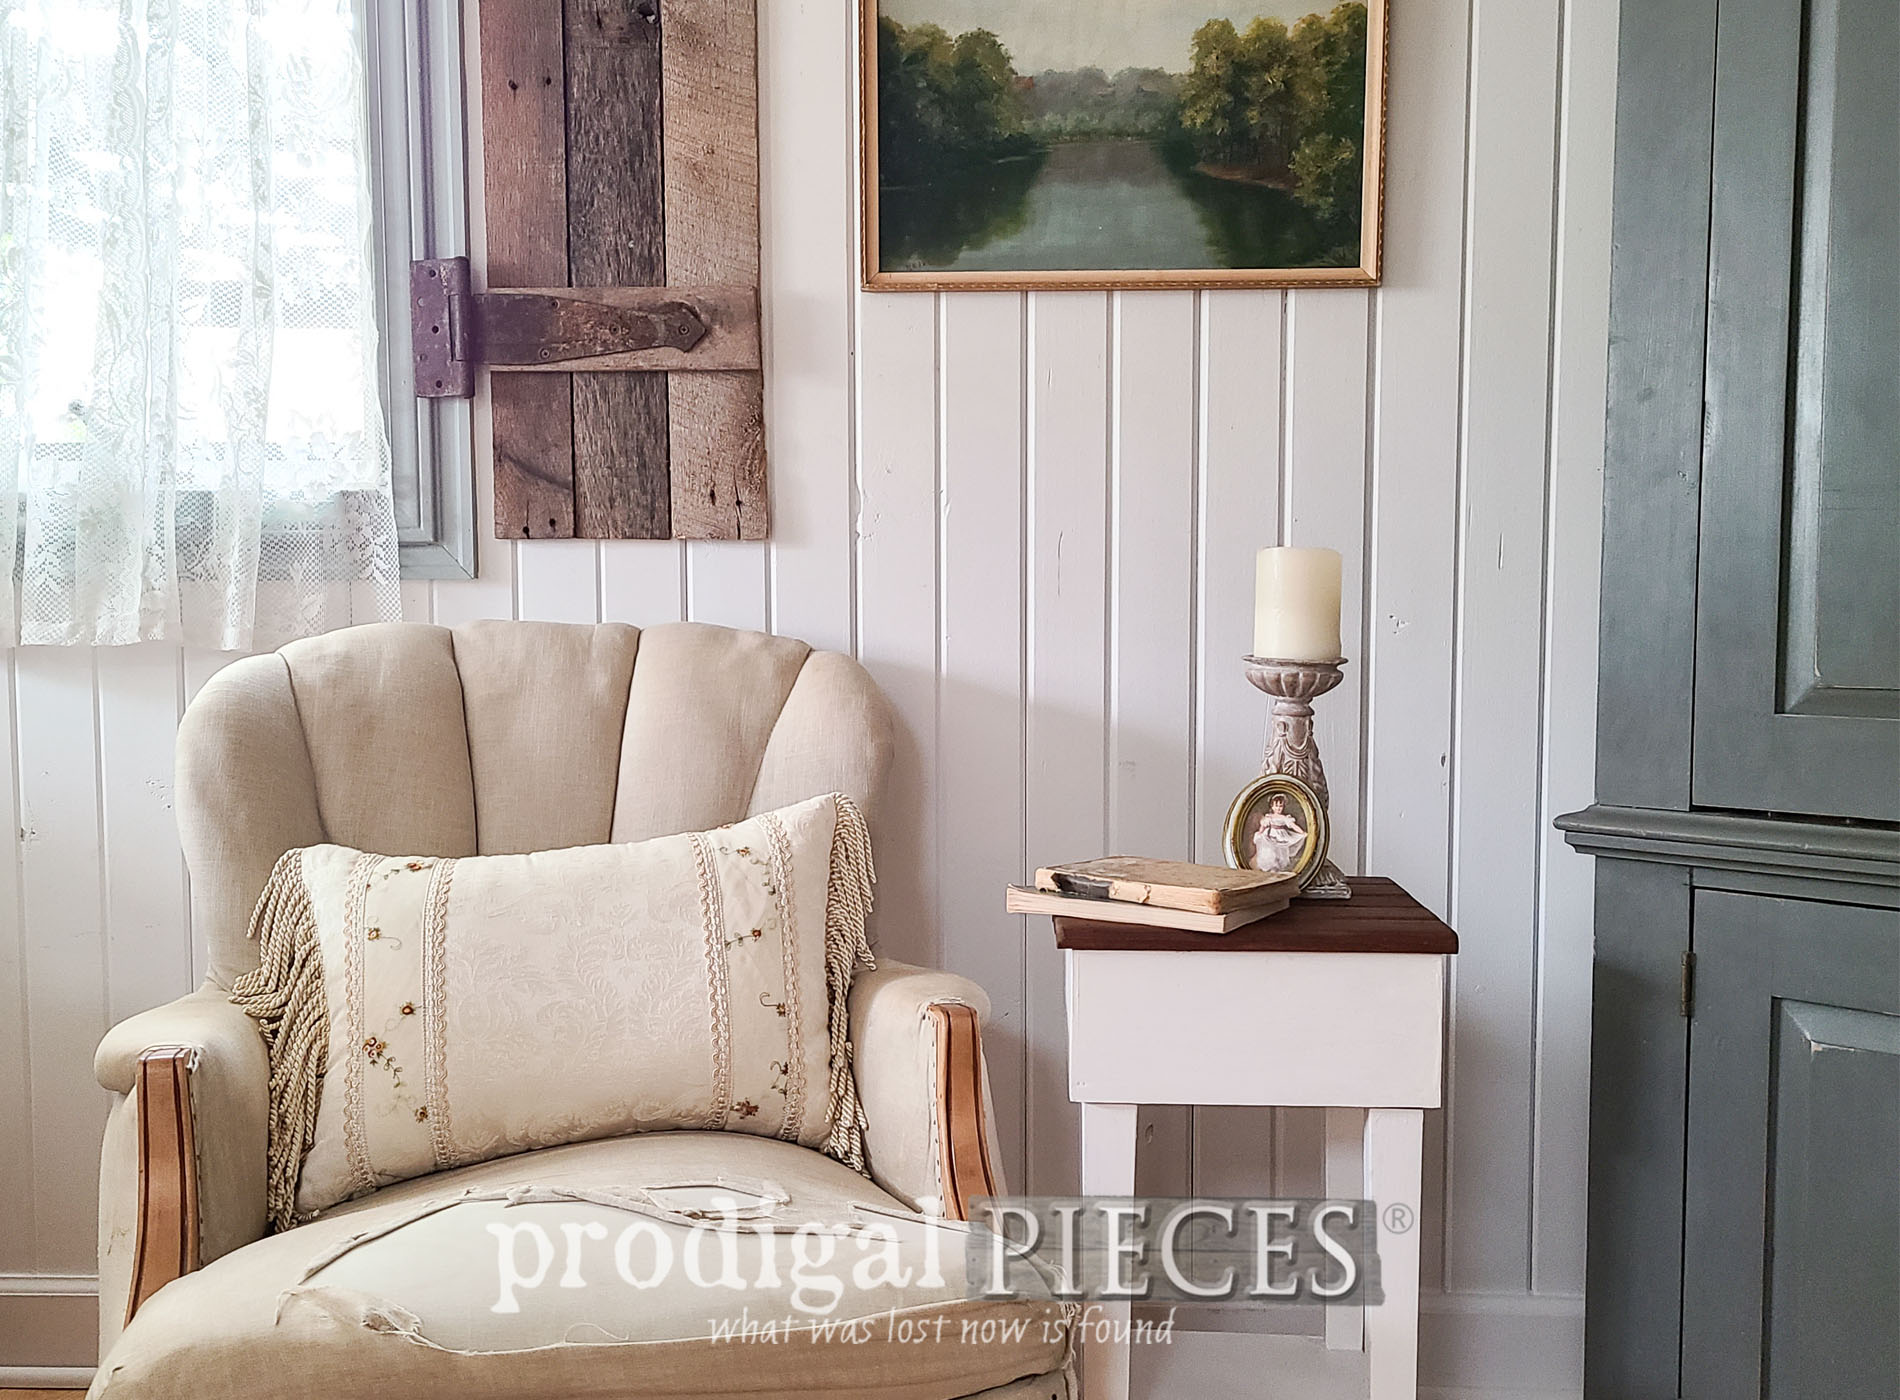 Featured DIY Accent Table Makeover and Upcycle by Larissa of Prodigal Pieces | prodigalpieces.com #prodigalpieces #diy #farmhouse #furniture